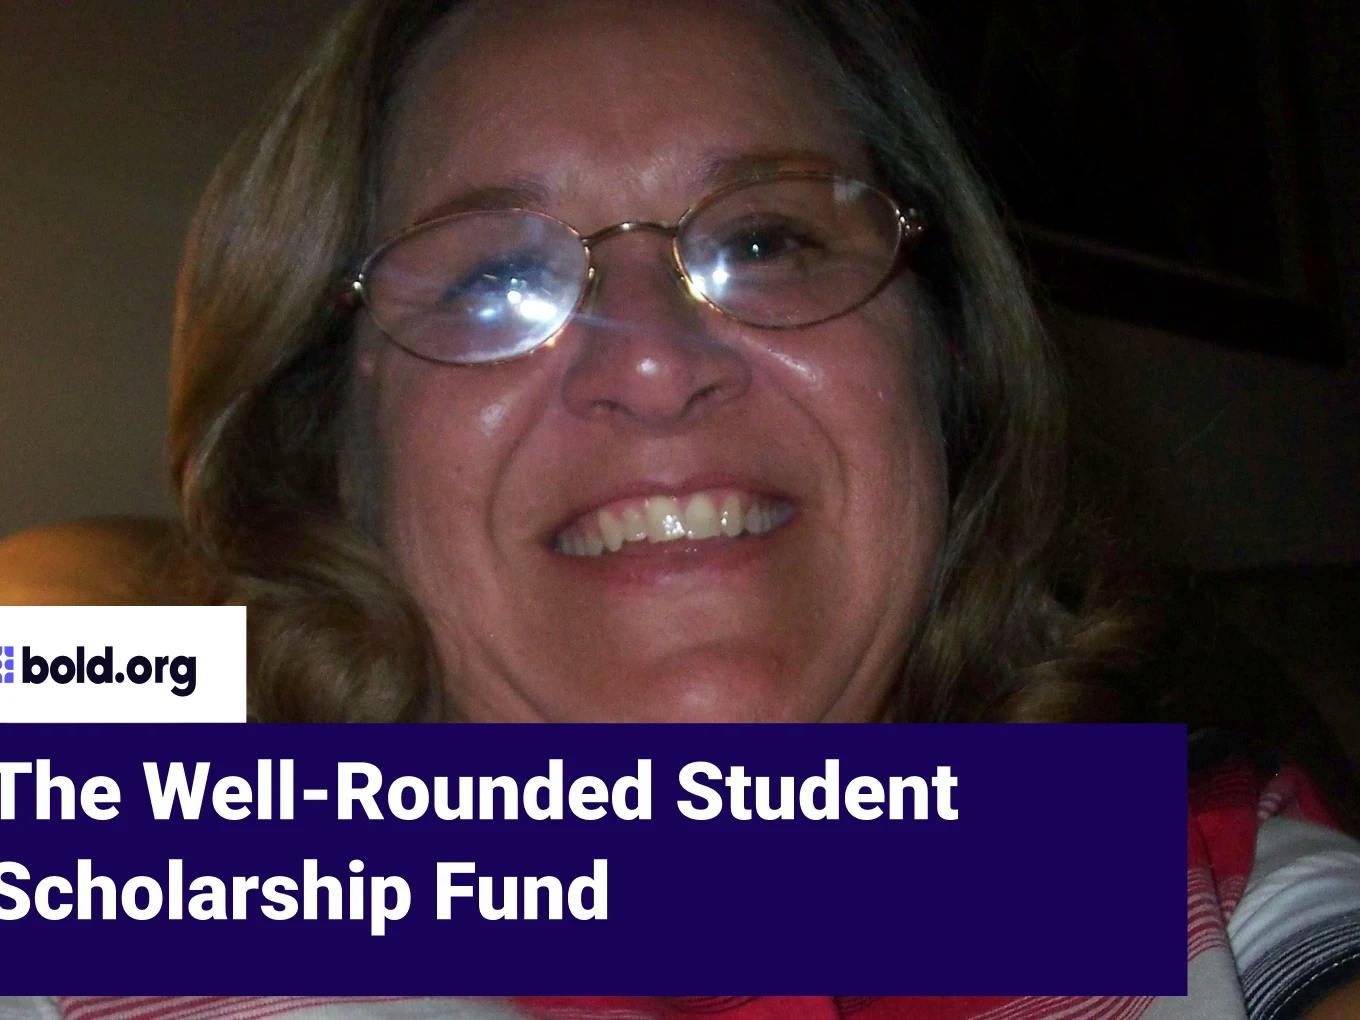 Well-Rounded Student Scholarship Fund